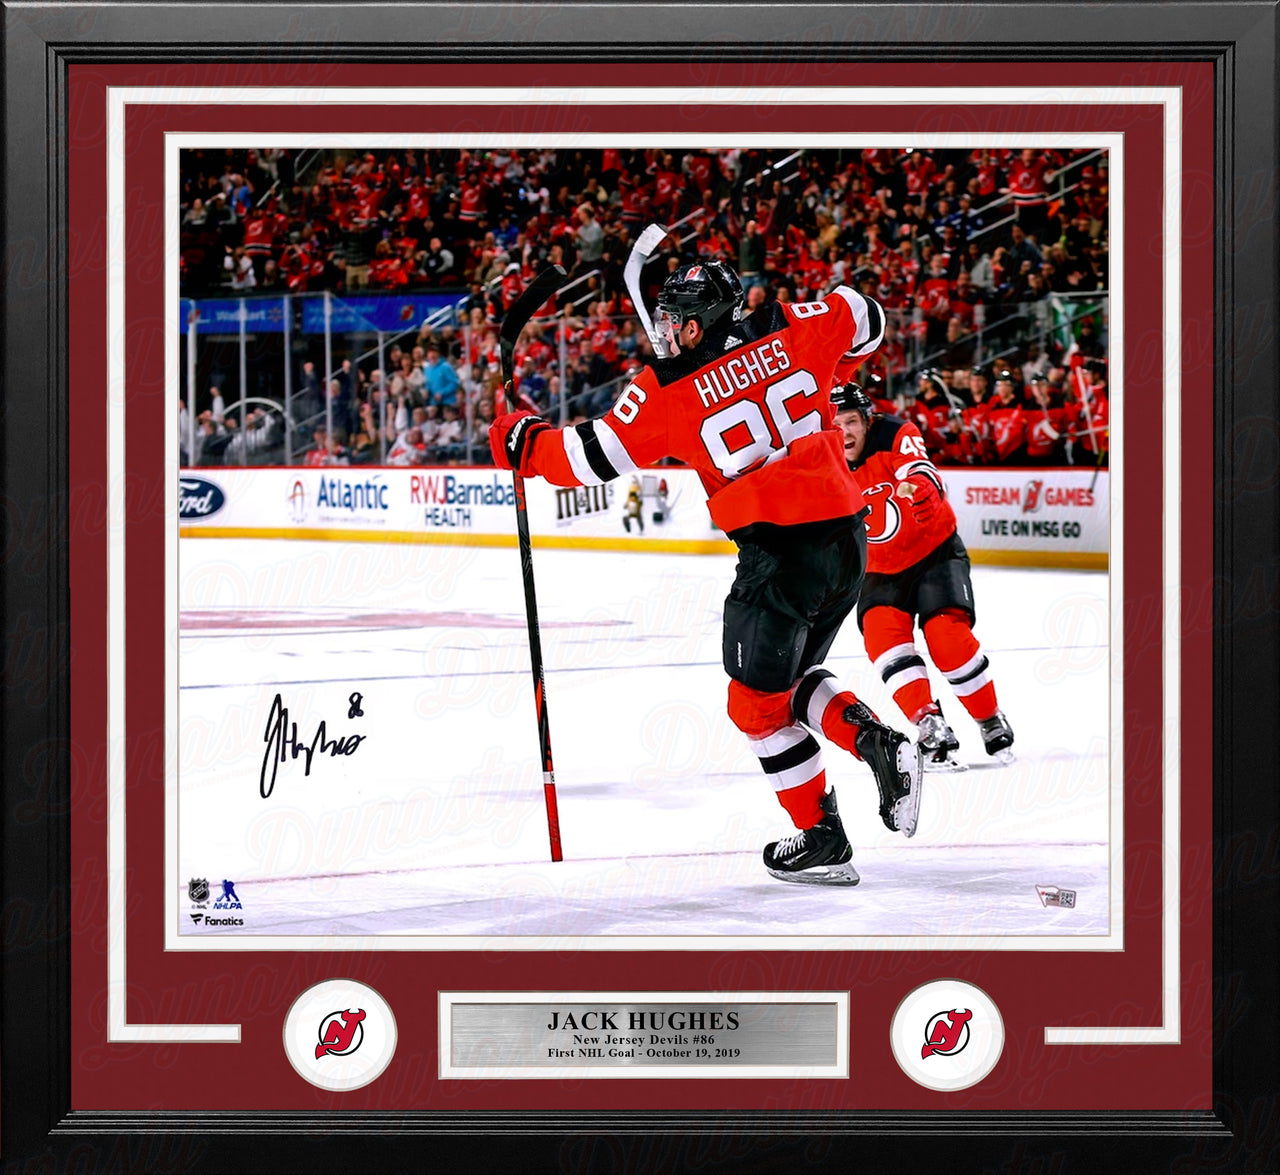 Jack Hughes New Jersey Devils Signed Autographed 8x10 Photo